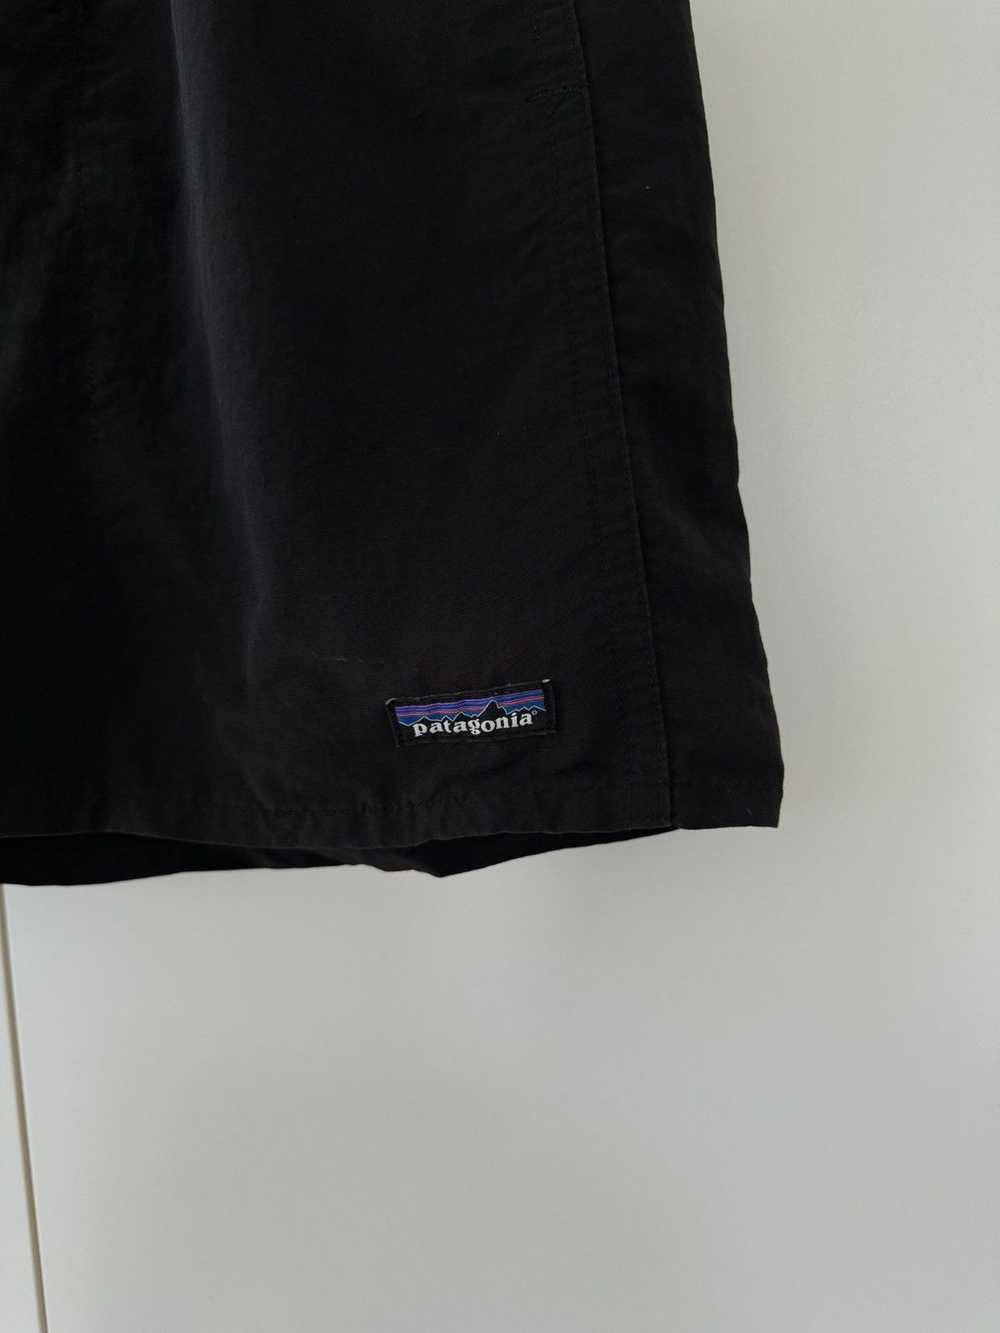 Patagonia 5” Baggie Shorts with Nets Black XL - image 2